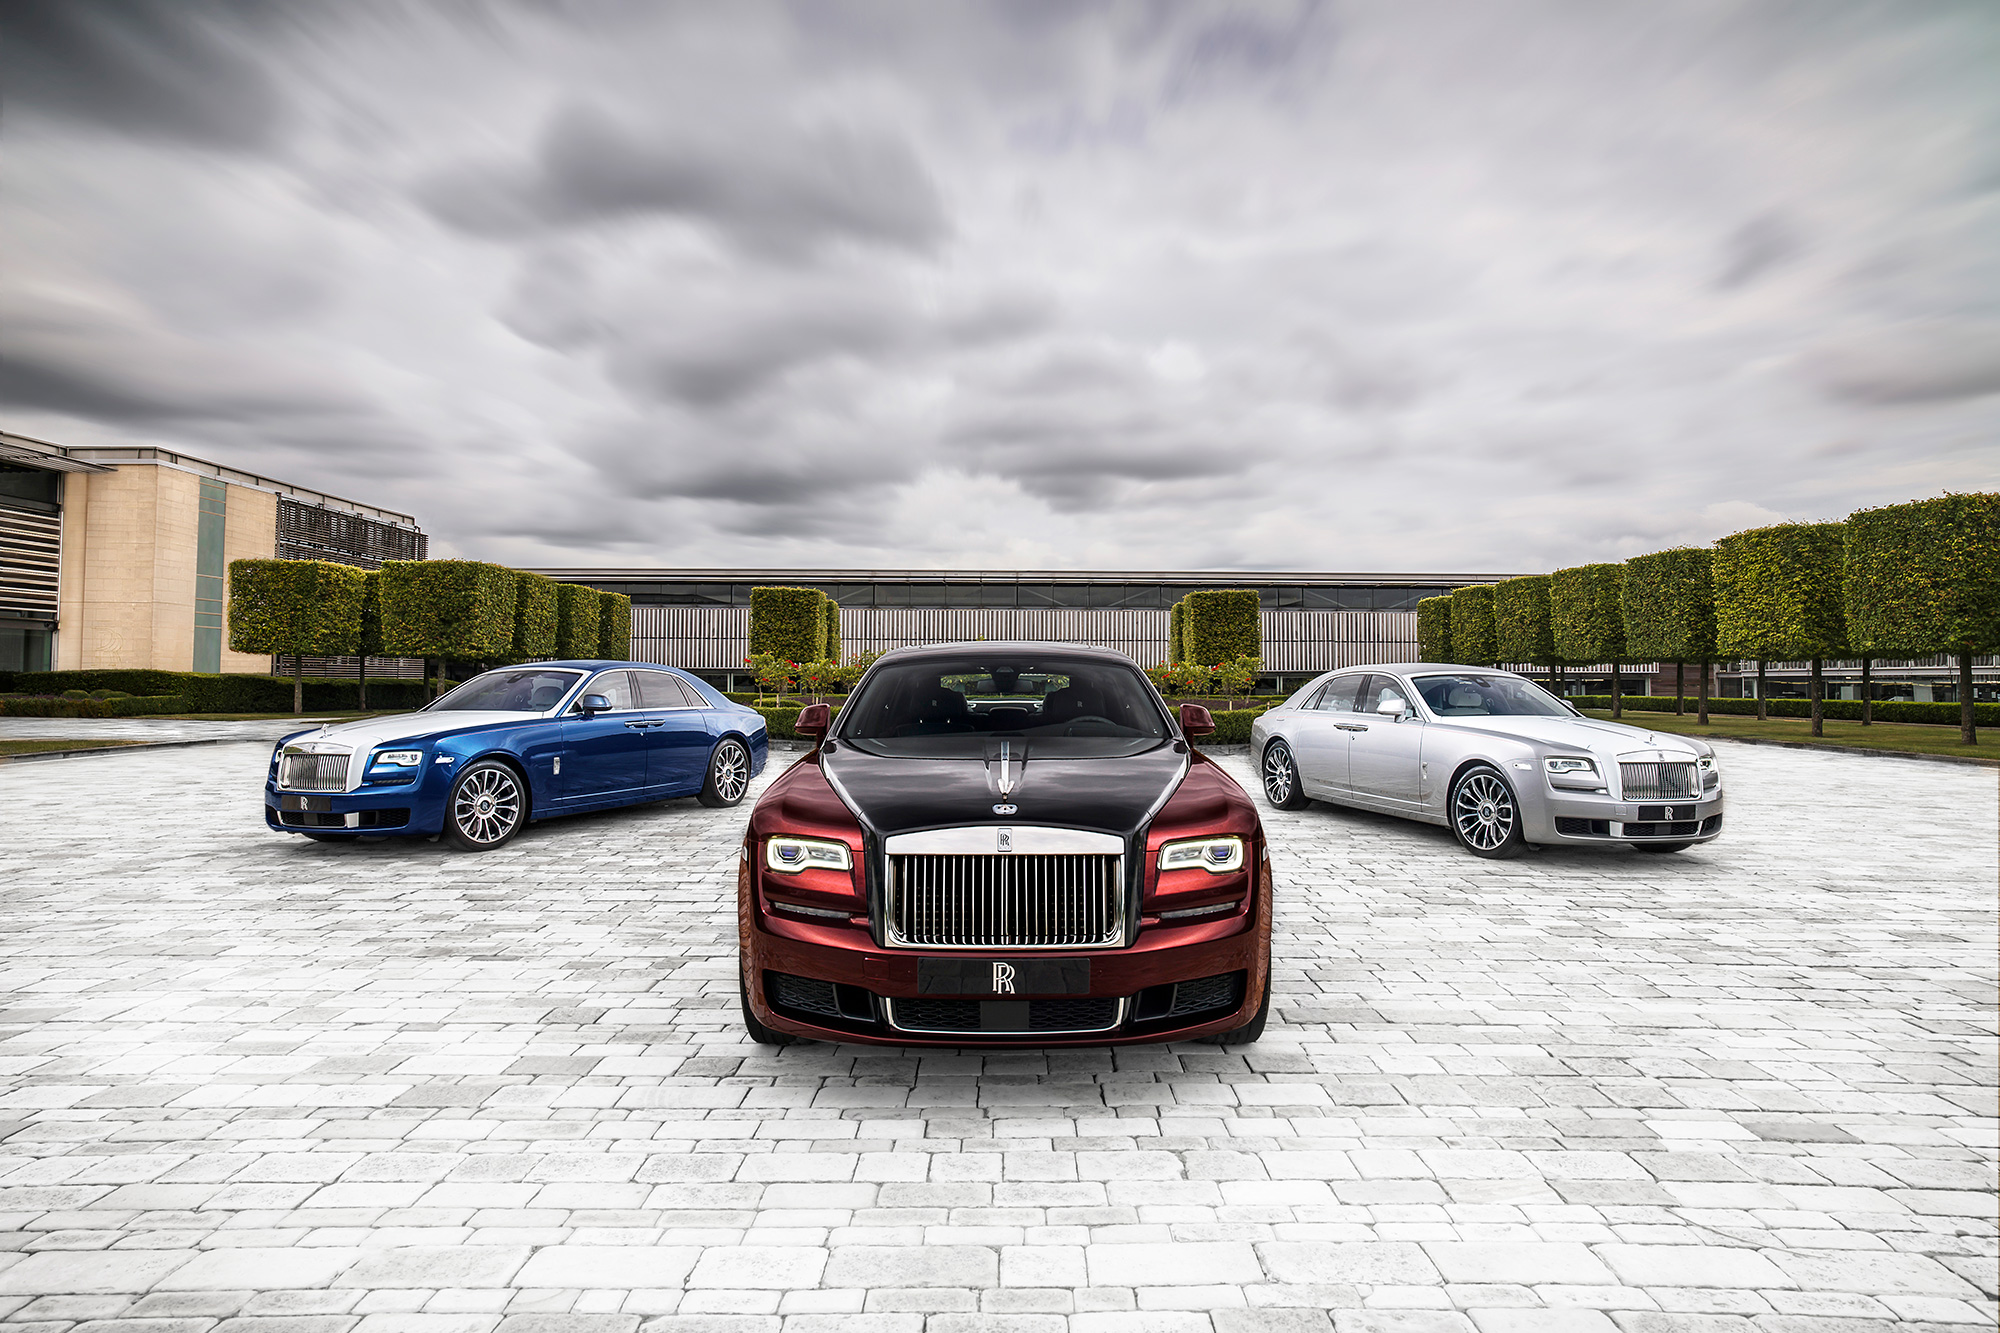 The new Rolls-Royce Zenith Collectors Edition